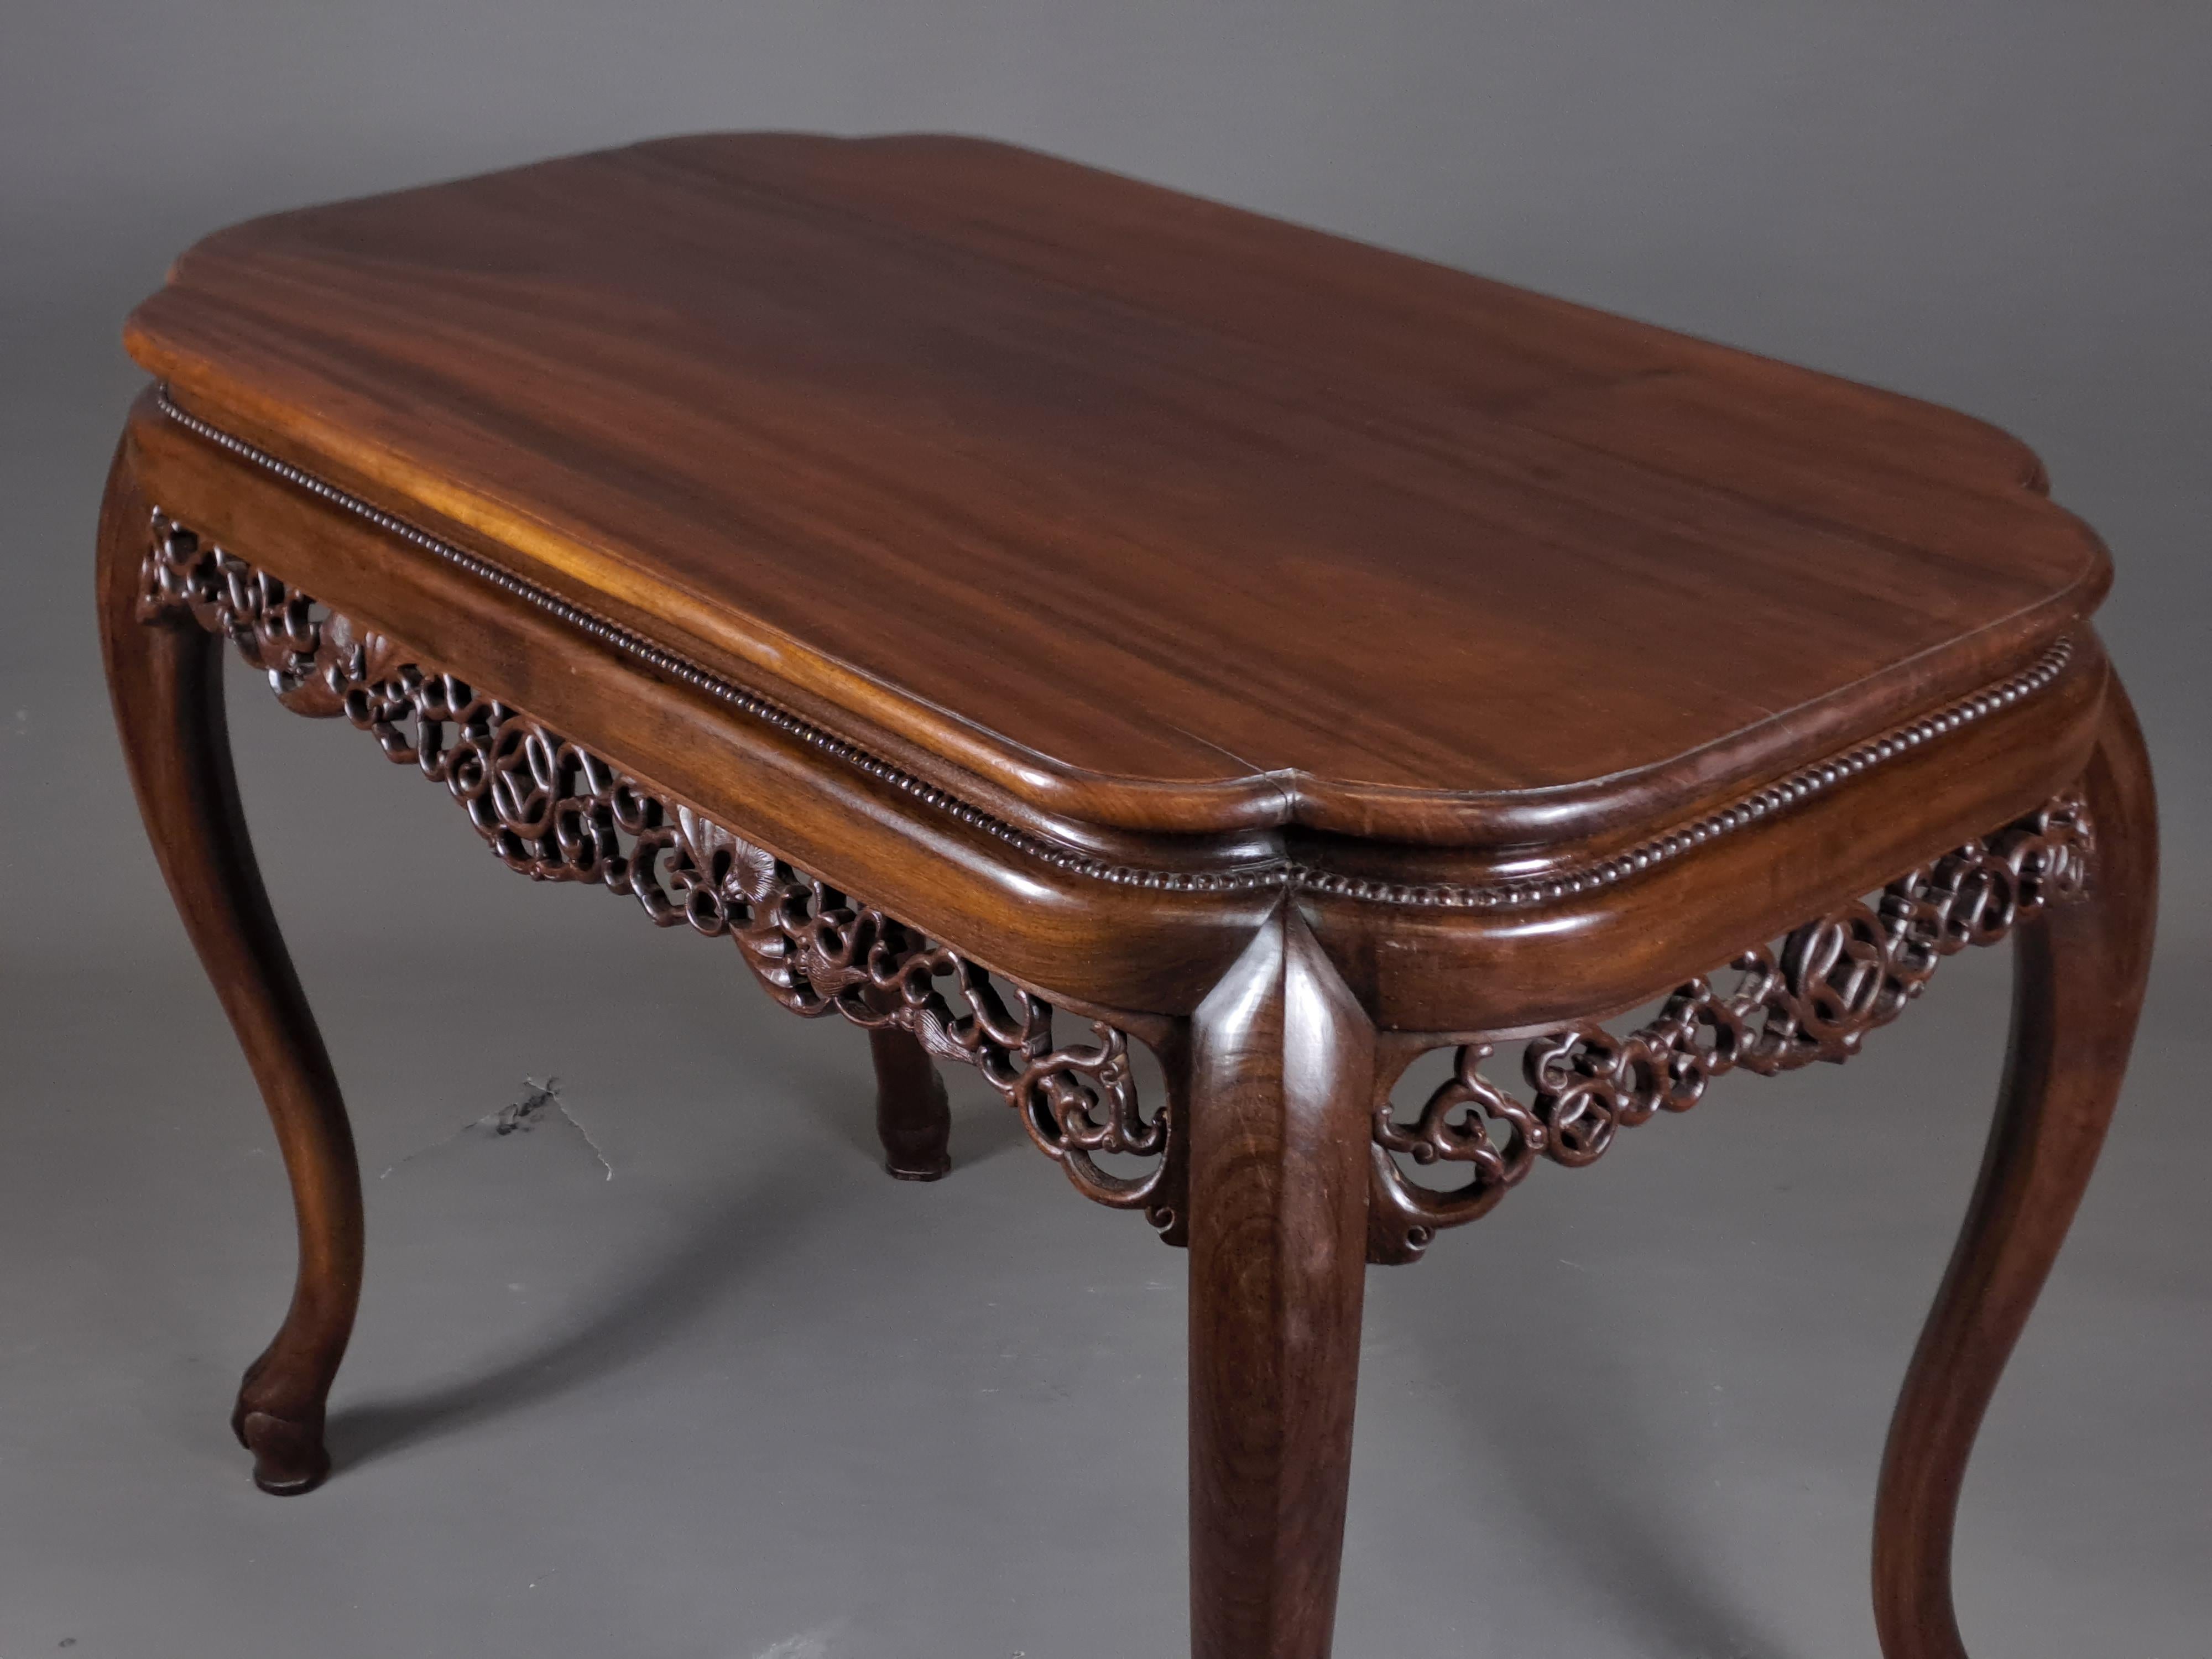 Beautiful center table in solid mahogany richly carved on the belt of scrolls and bats, top with scalloped corners surmounted by an ogee acroterion decorated with a beaded frieze.

Four curved legs ending in the shape of eagle claws holding a